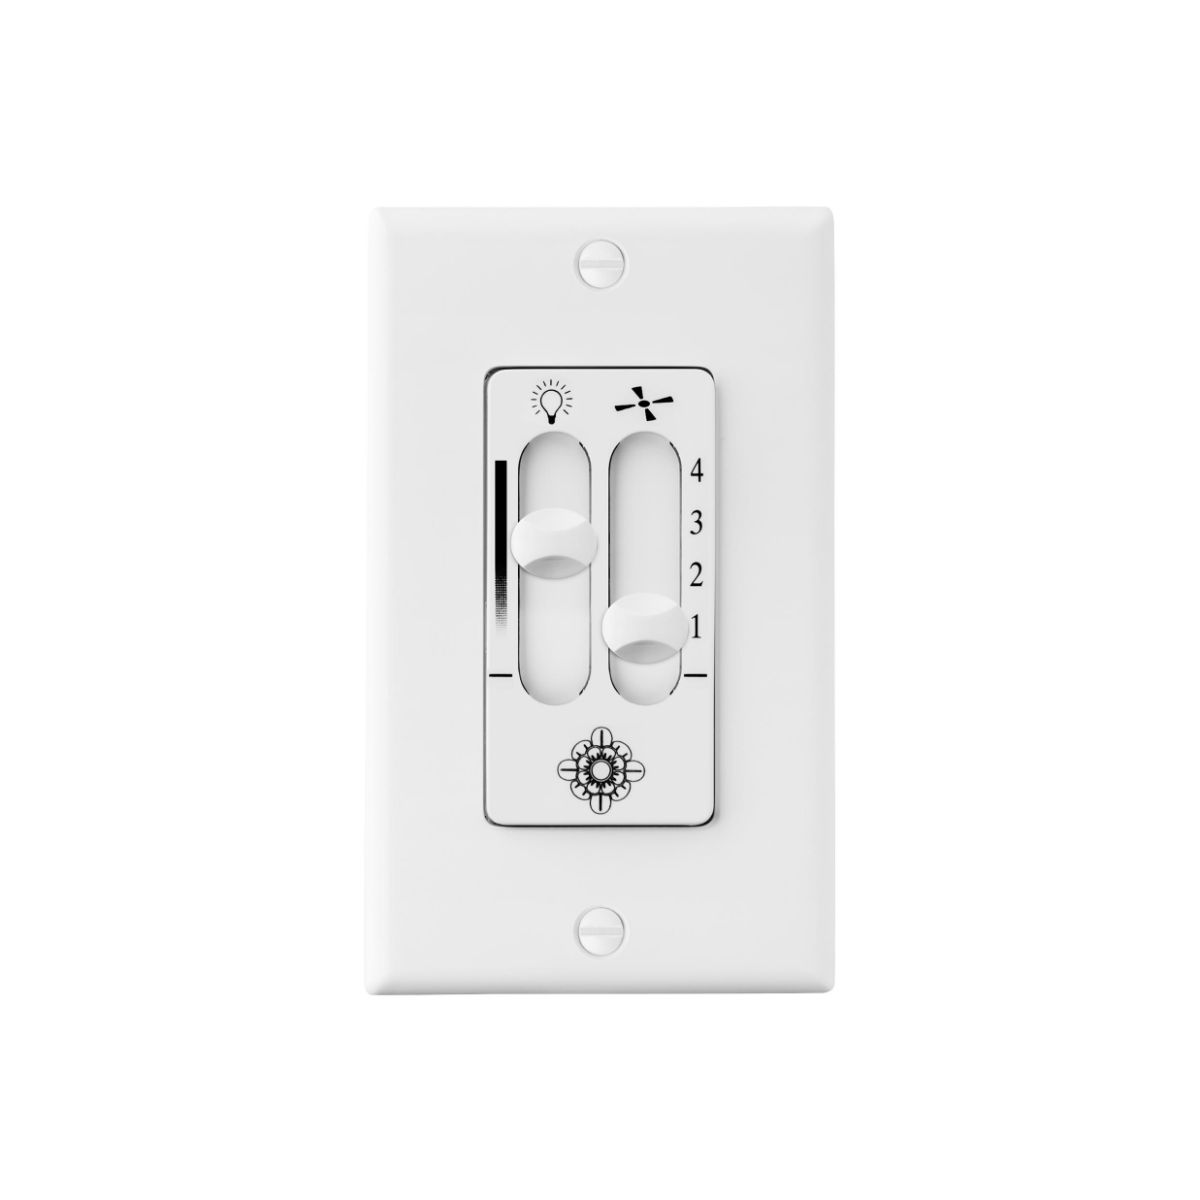 4-Speed Dimmer Ceiling Fan Wall Control, White Finish